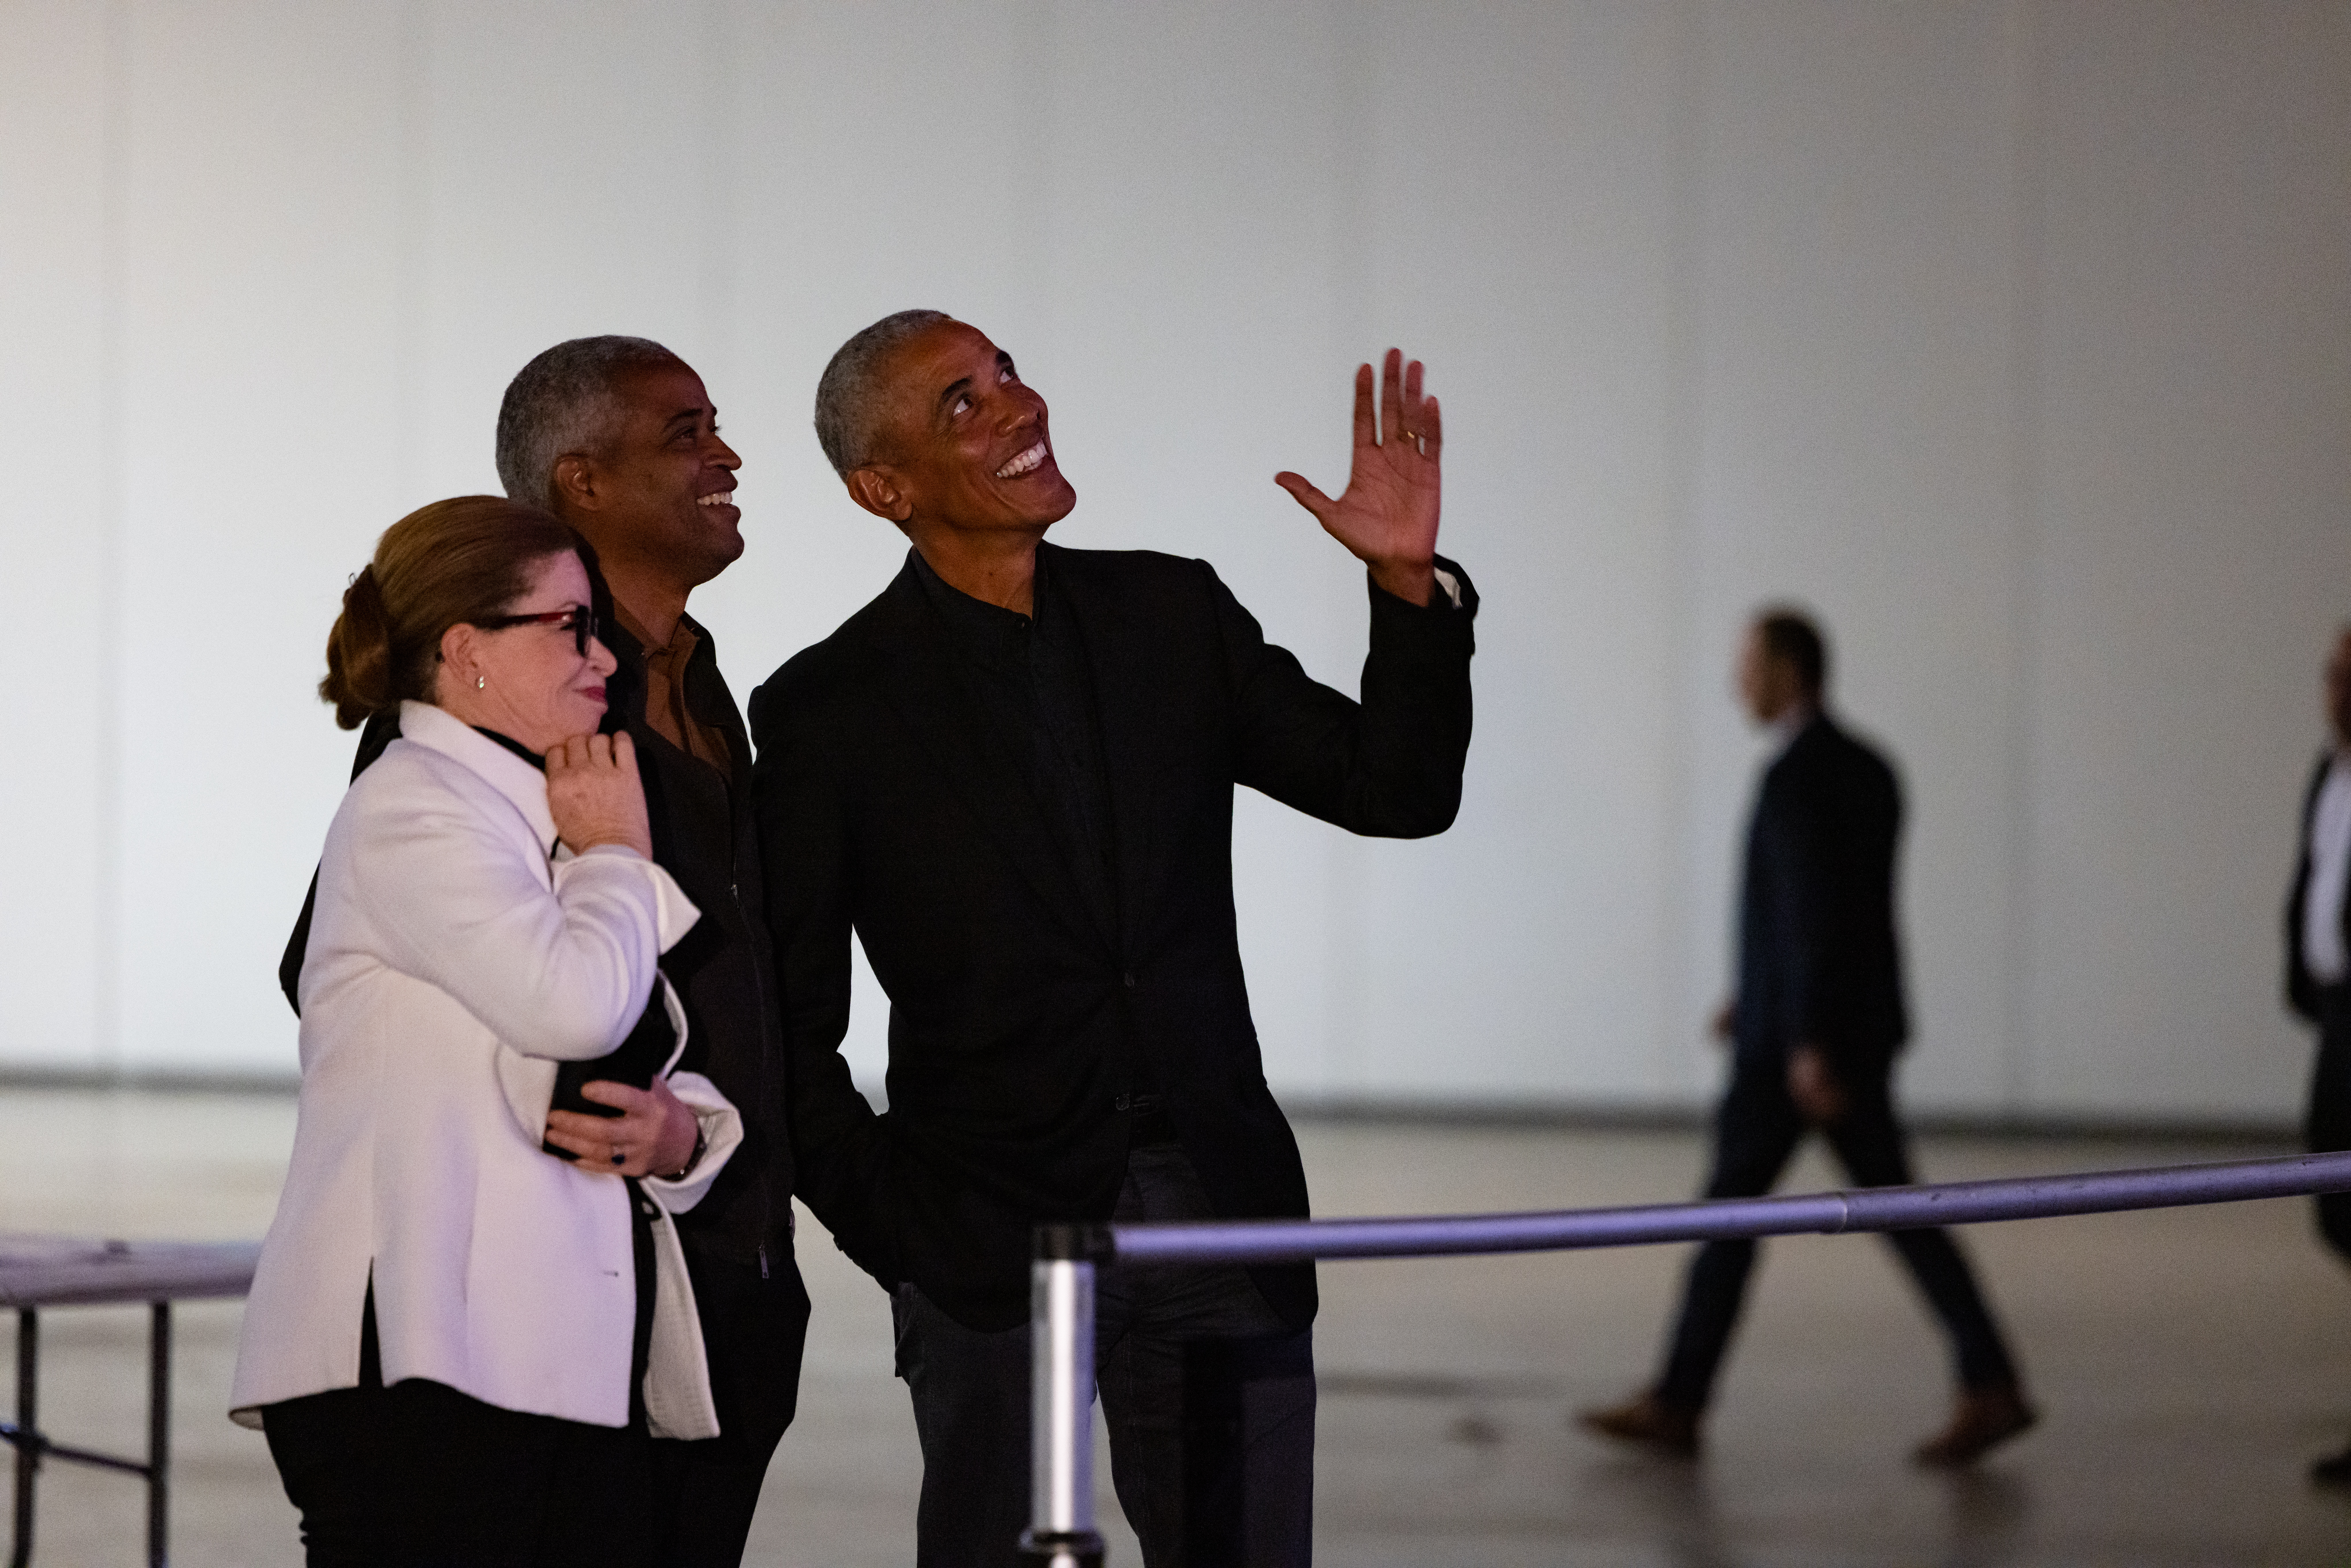 The image is a photograph of Barack Obama, Valerie Jarrett, and Marty Nesbitt looking at the Power of Words prototype. Barack Obama stands to the far left and is gesturing towards the Power of Words prototype with his left hand. He is wearing a black blazer, a black shirt, and dark denim pants. Marty Nesbitt stands in the middle: he is smiling. He has a brown dark complexion and gray hair. Valerie Jarrett stands on the far right. She is smiling with no teeth. Her hair is pulled back into a chingon and she is wearing black glasses. She has her right hand to her mouth. She is wearing a white blazer and black pants. Behind Valerie Jarrett, Marty Nesbitt, and Barack Obama is a white wall.  